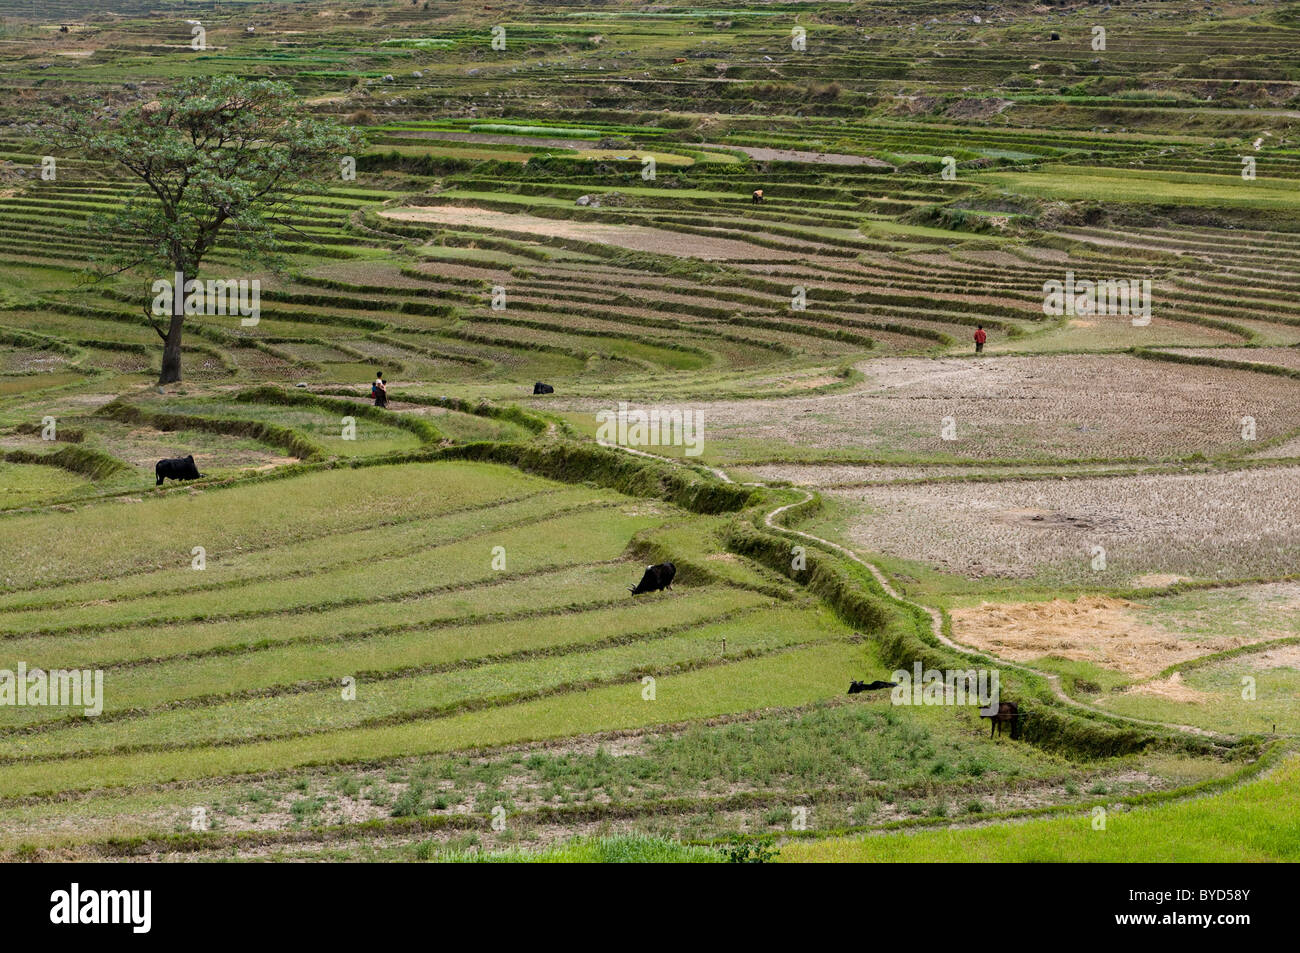 Paddy fields near Chimi Lhakhang temple or moanstery, Bhutan, Asia Stock Photo